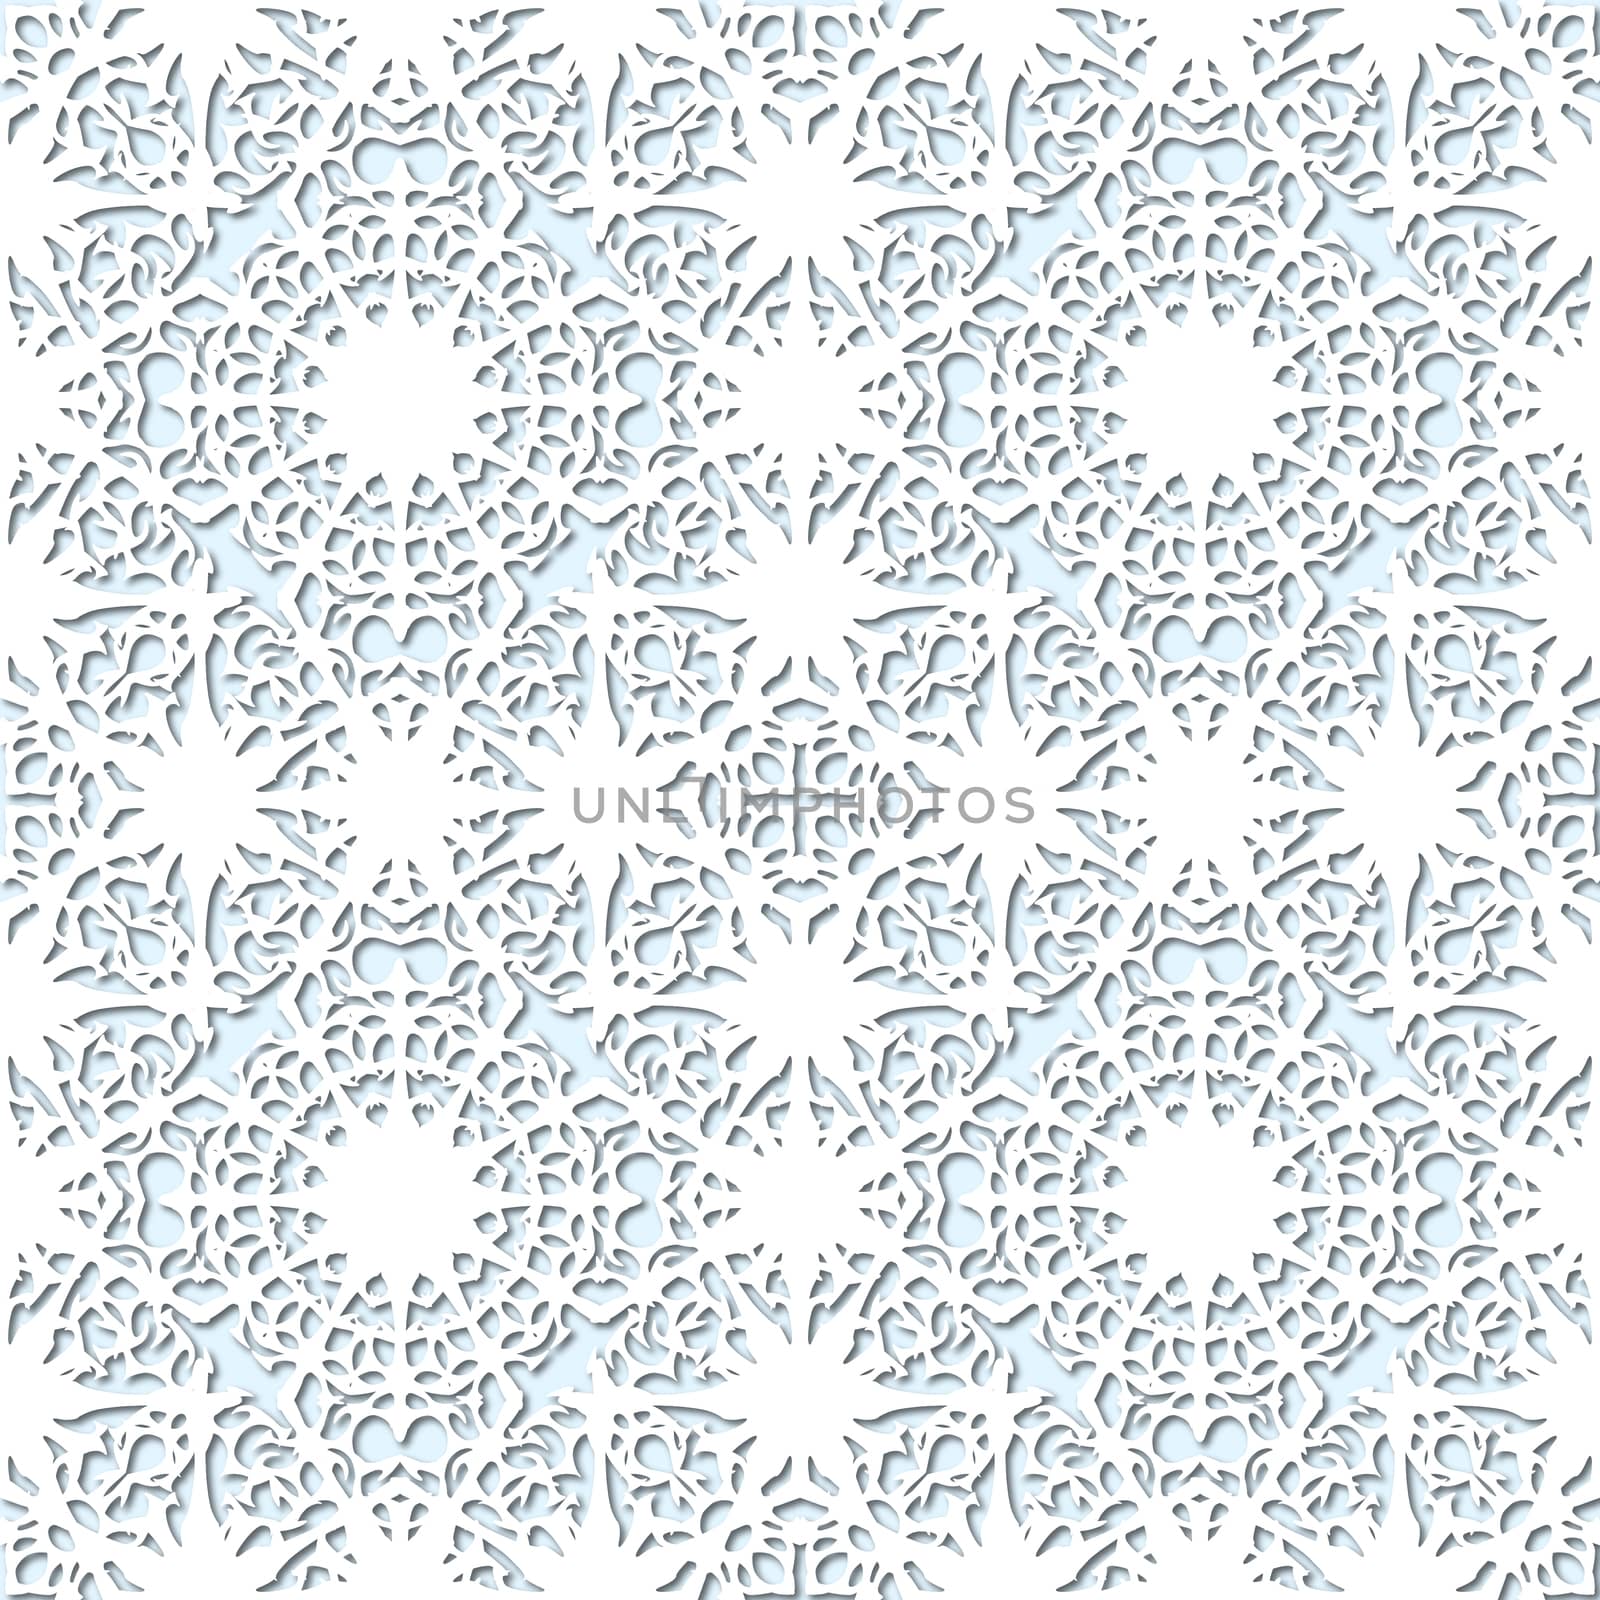 White snowflakes on pale blue background, damask ornament seamless pattern. Paper cut style by Pashchenko